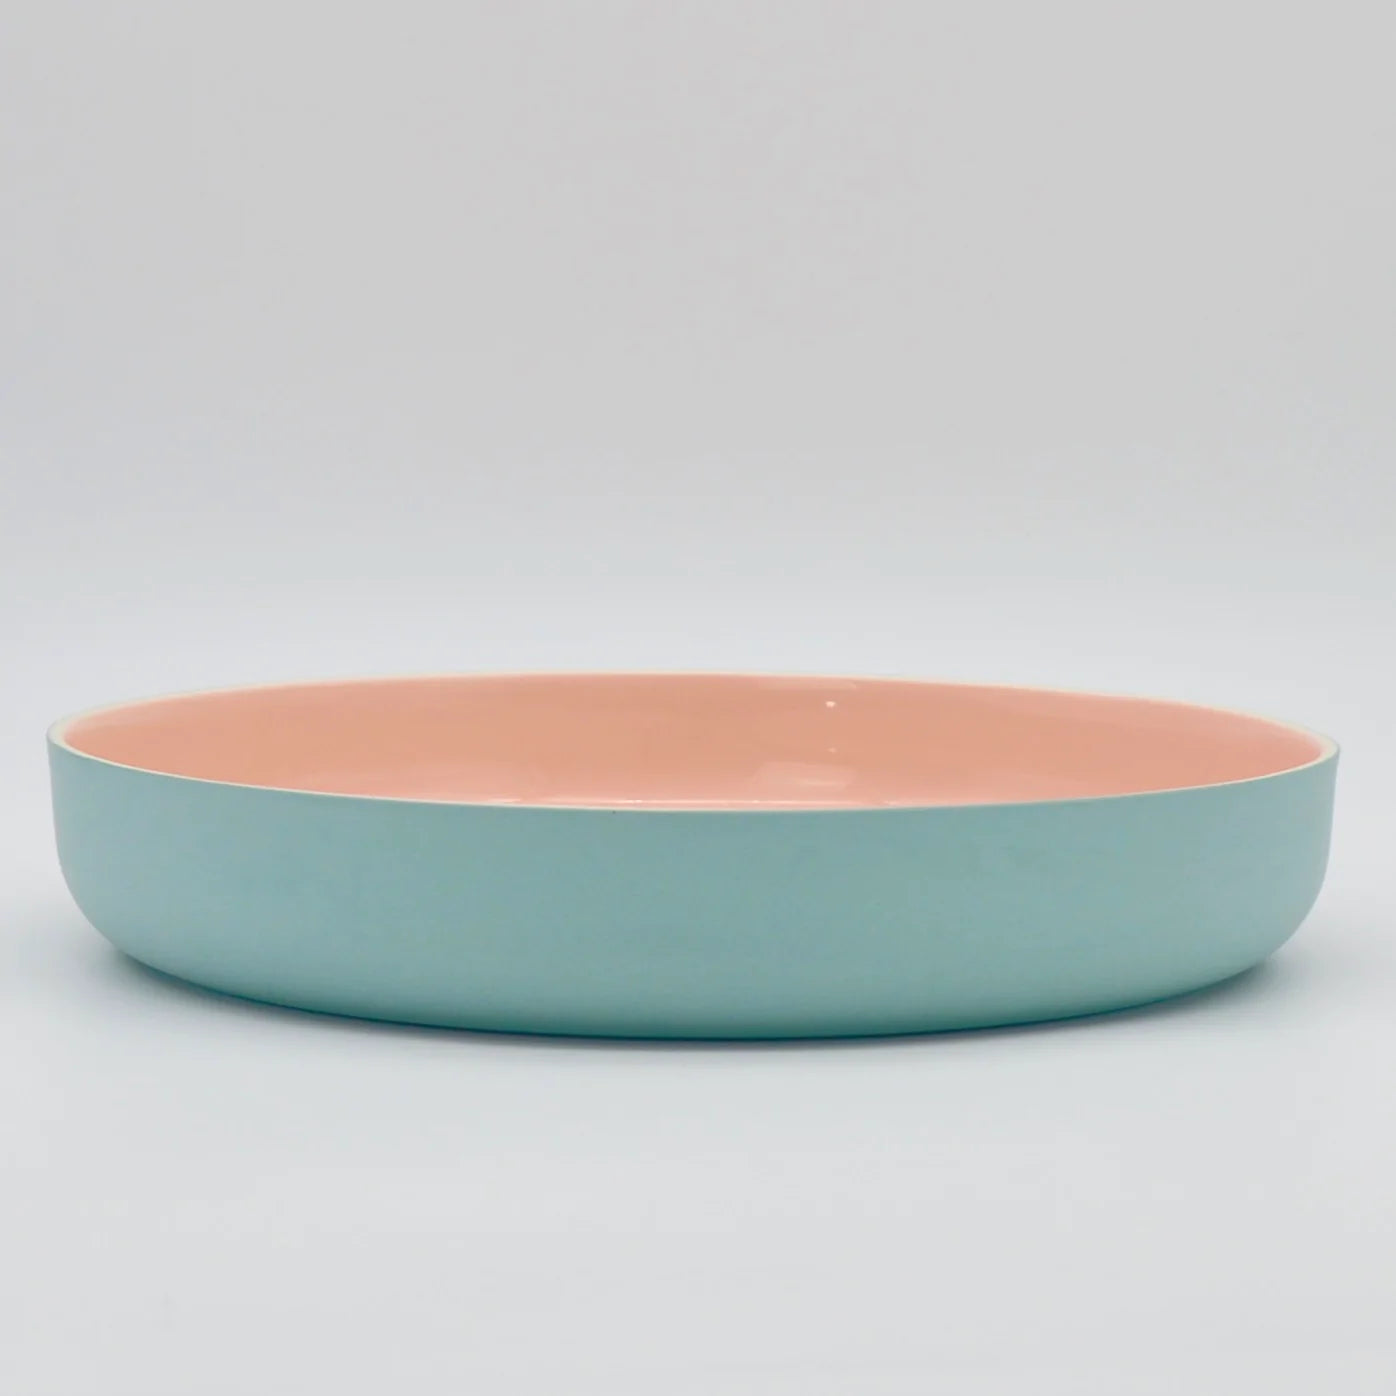 Serving Plate in Turquoise